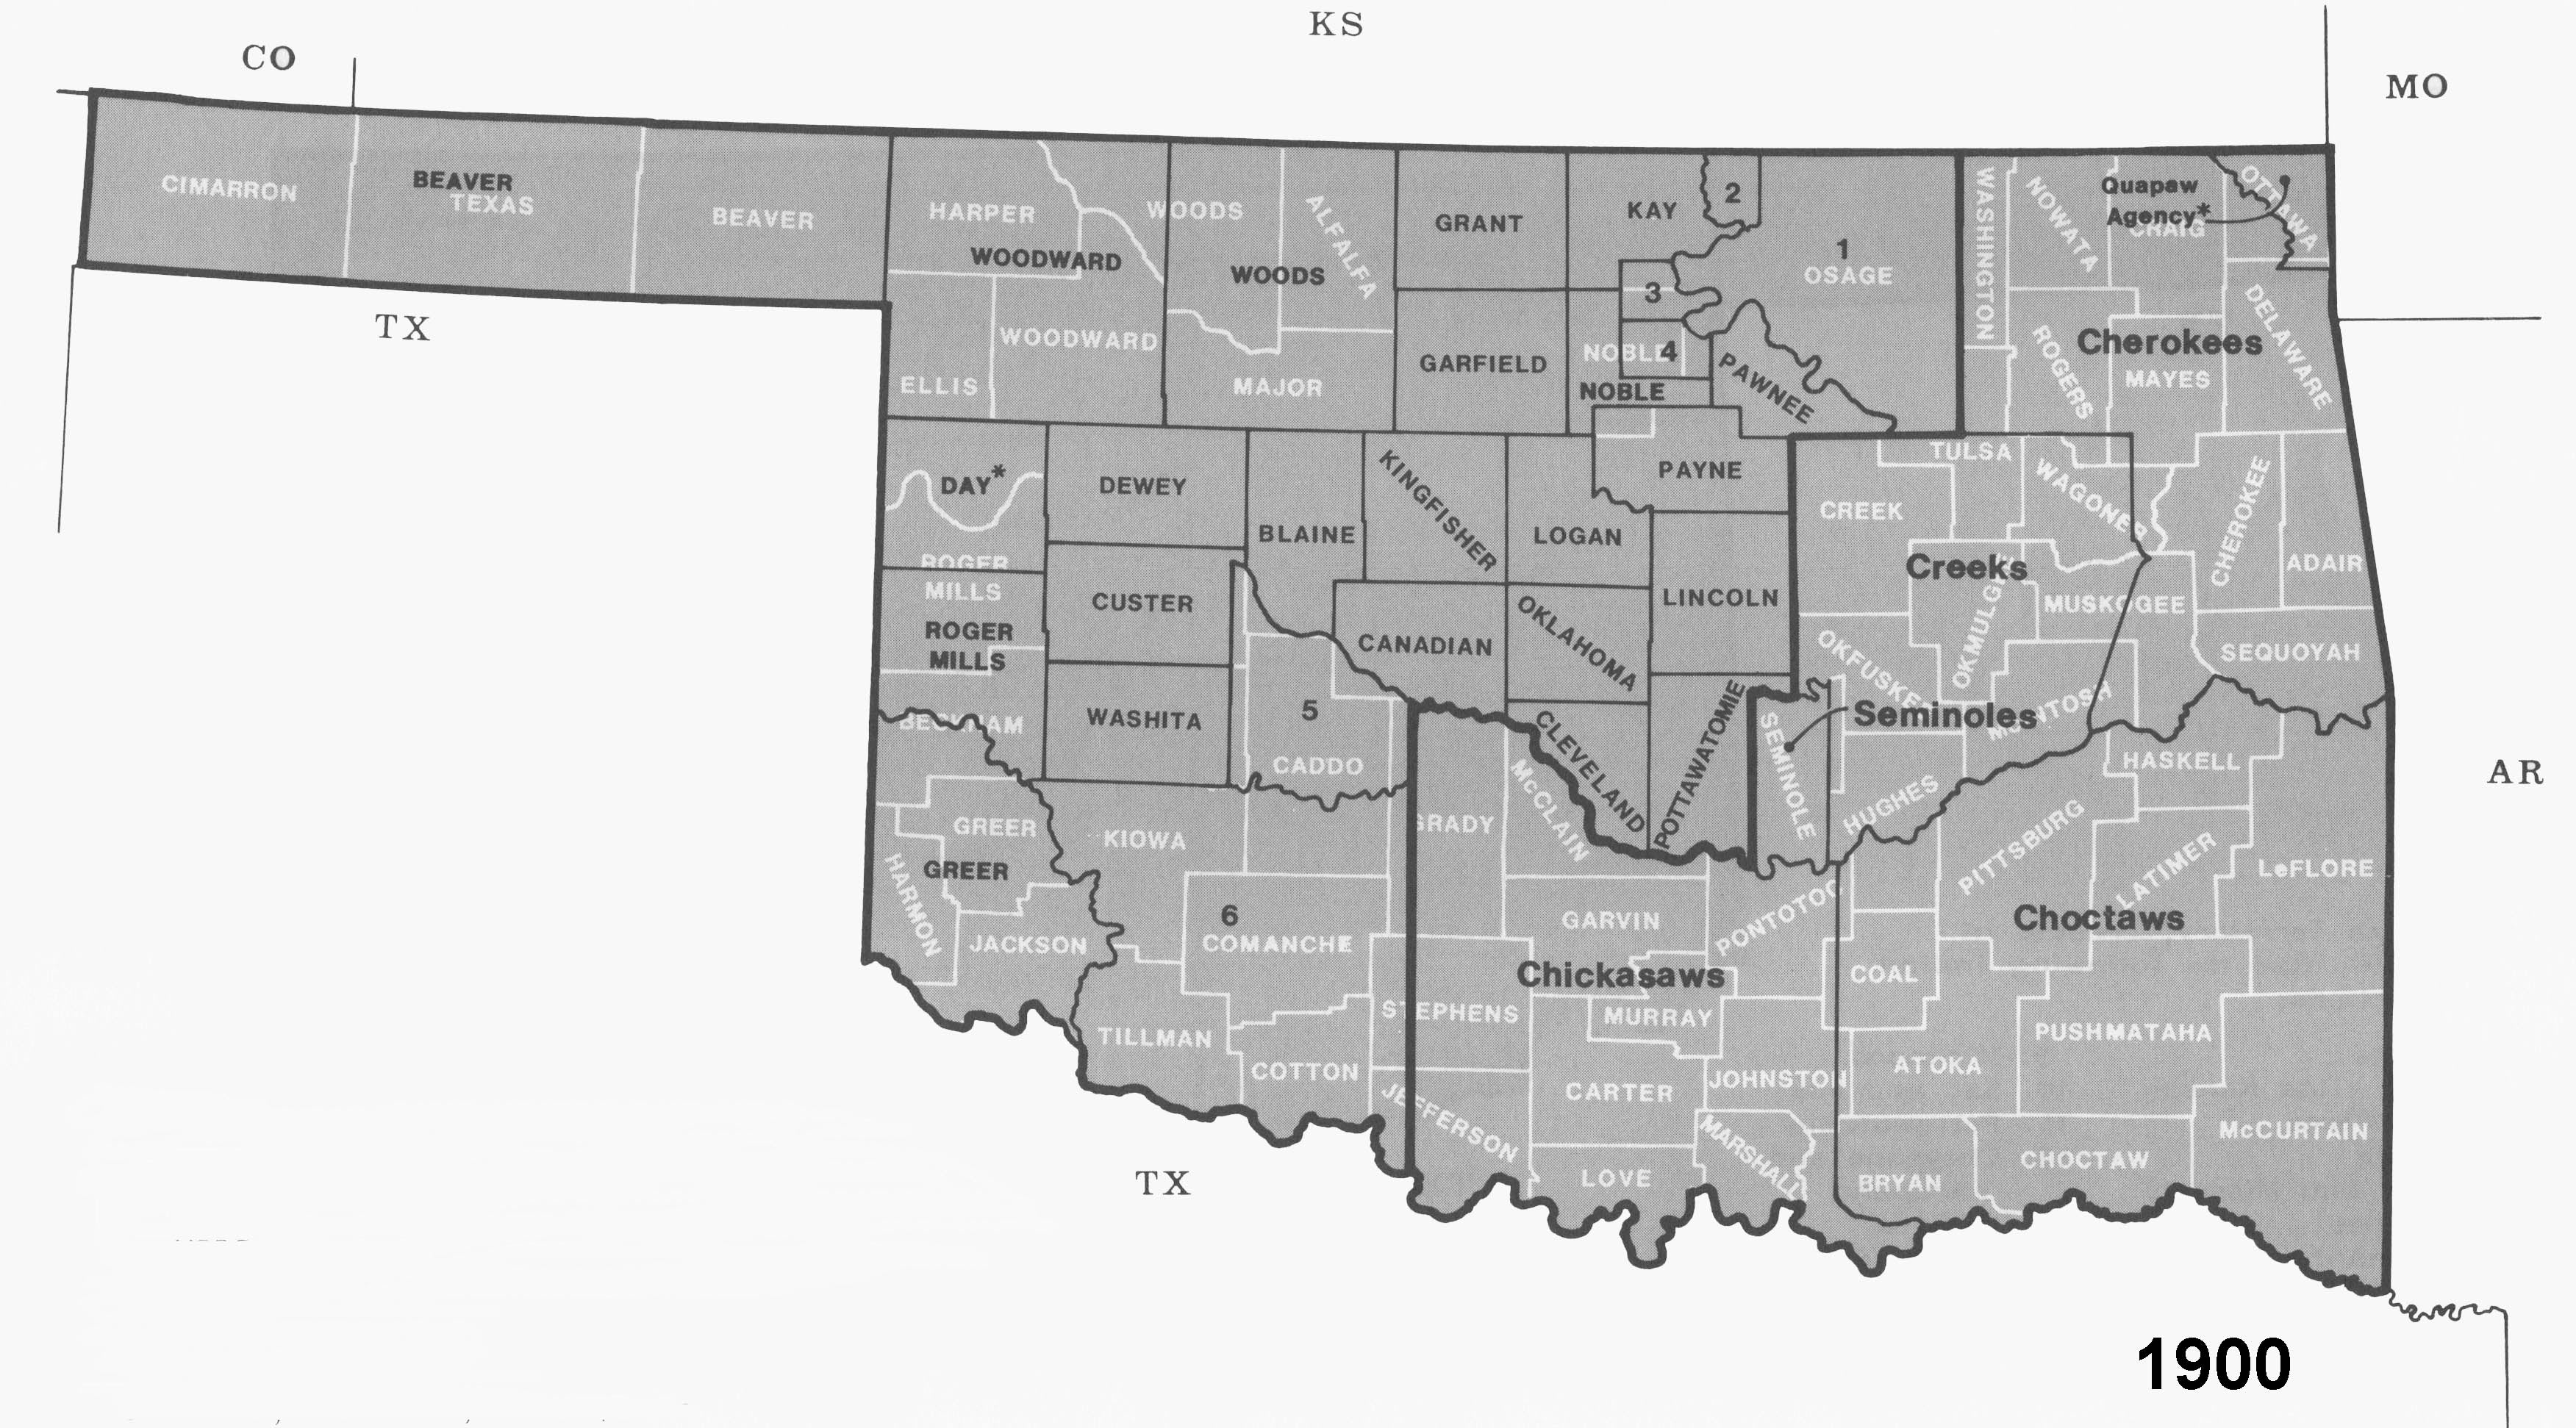 Oklahoma Censuses & Substitute Name Lists 1828-2012 - SOFTBOUND